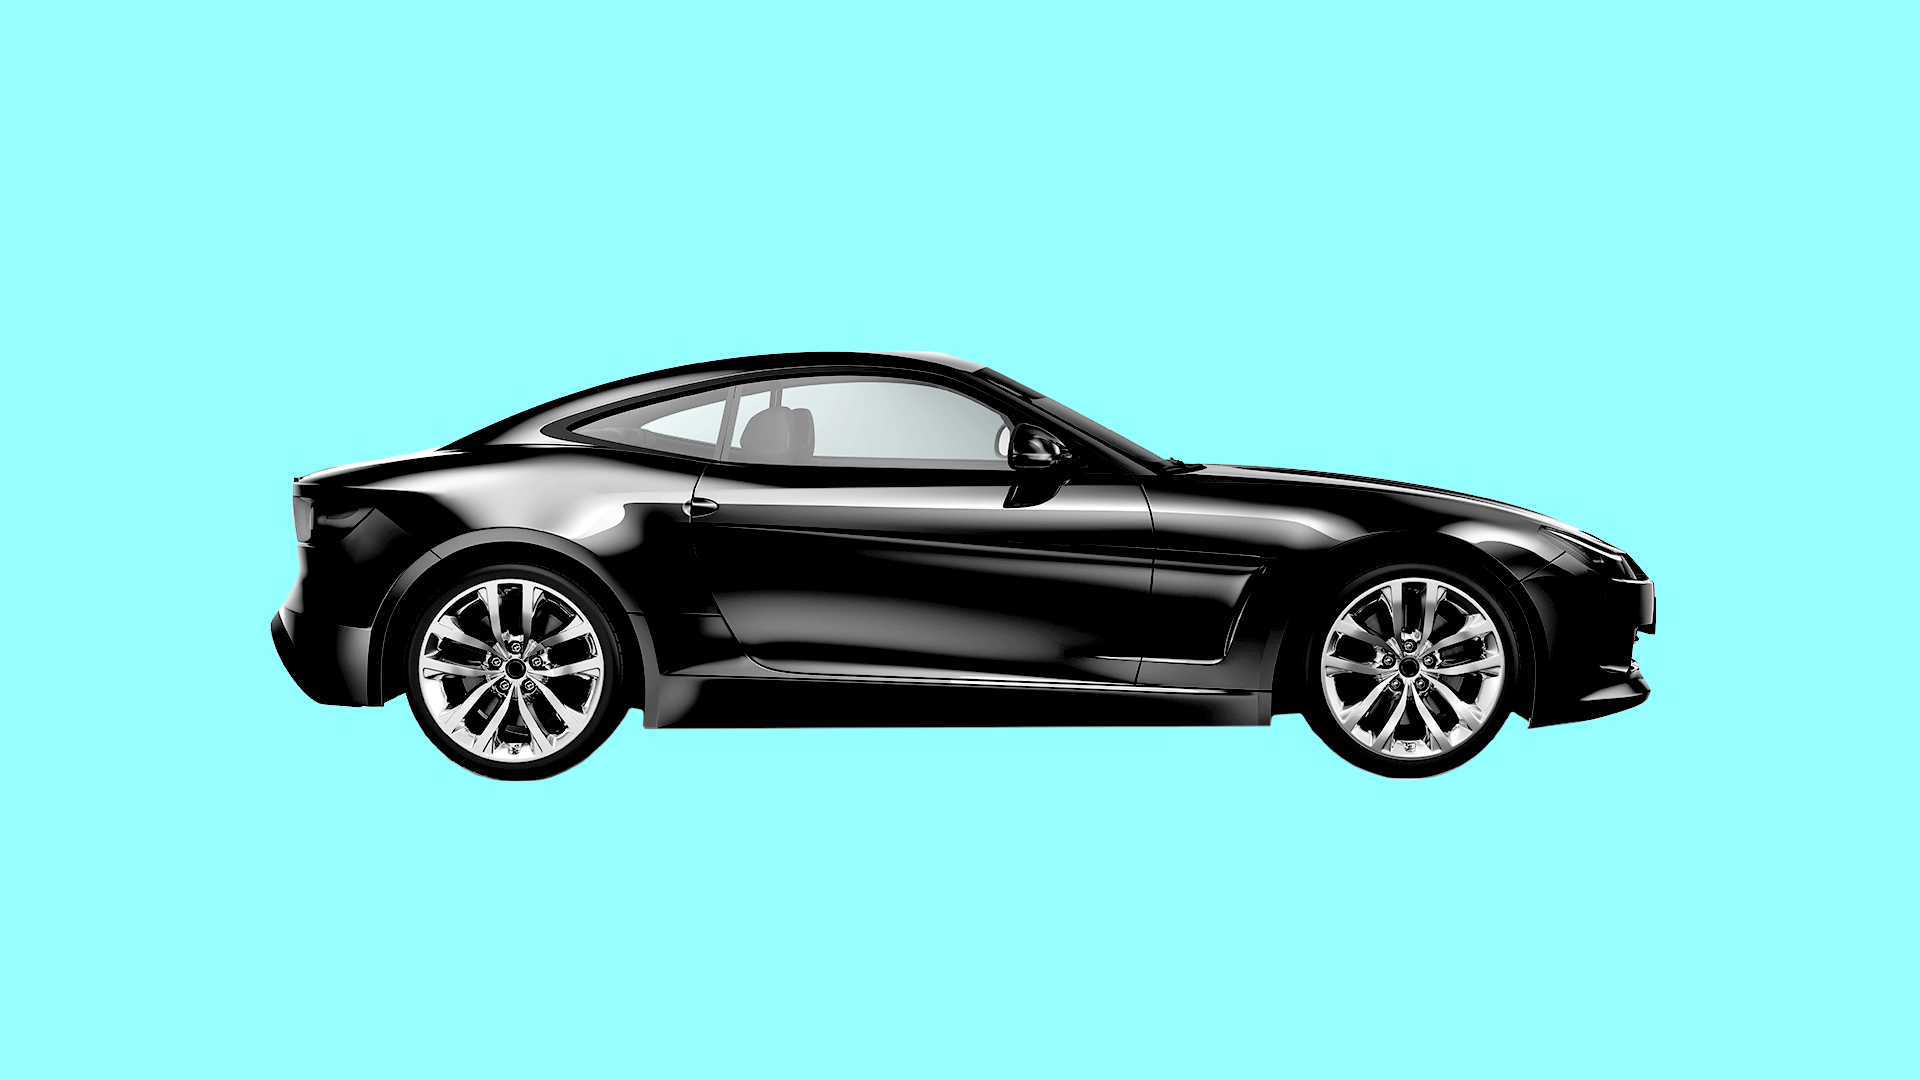 Illustration of light radiating out from a black car